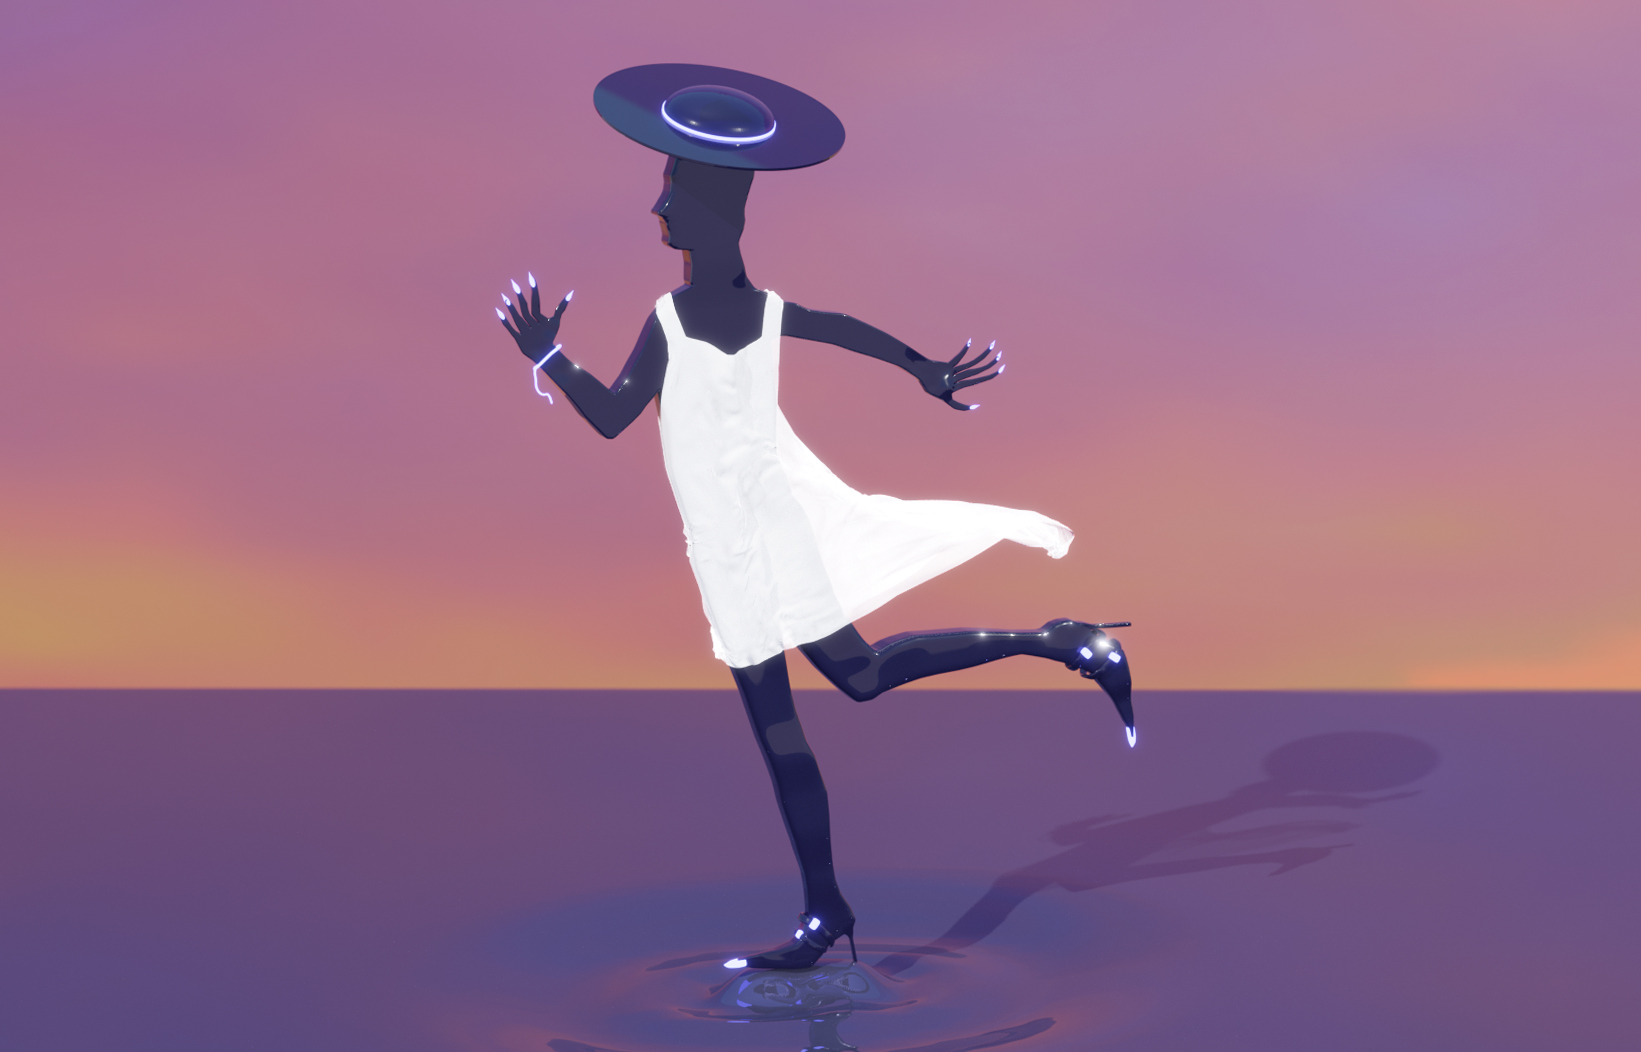 Dark figure in a white flowing dress running against a sunset background.